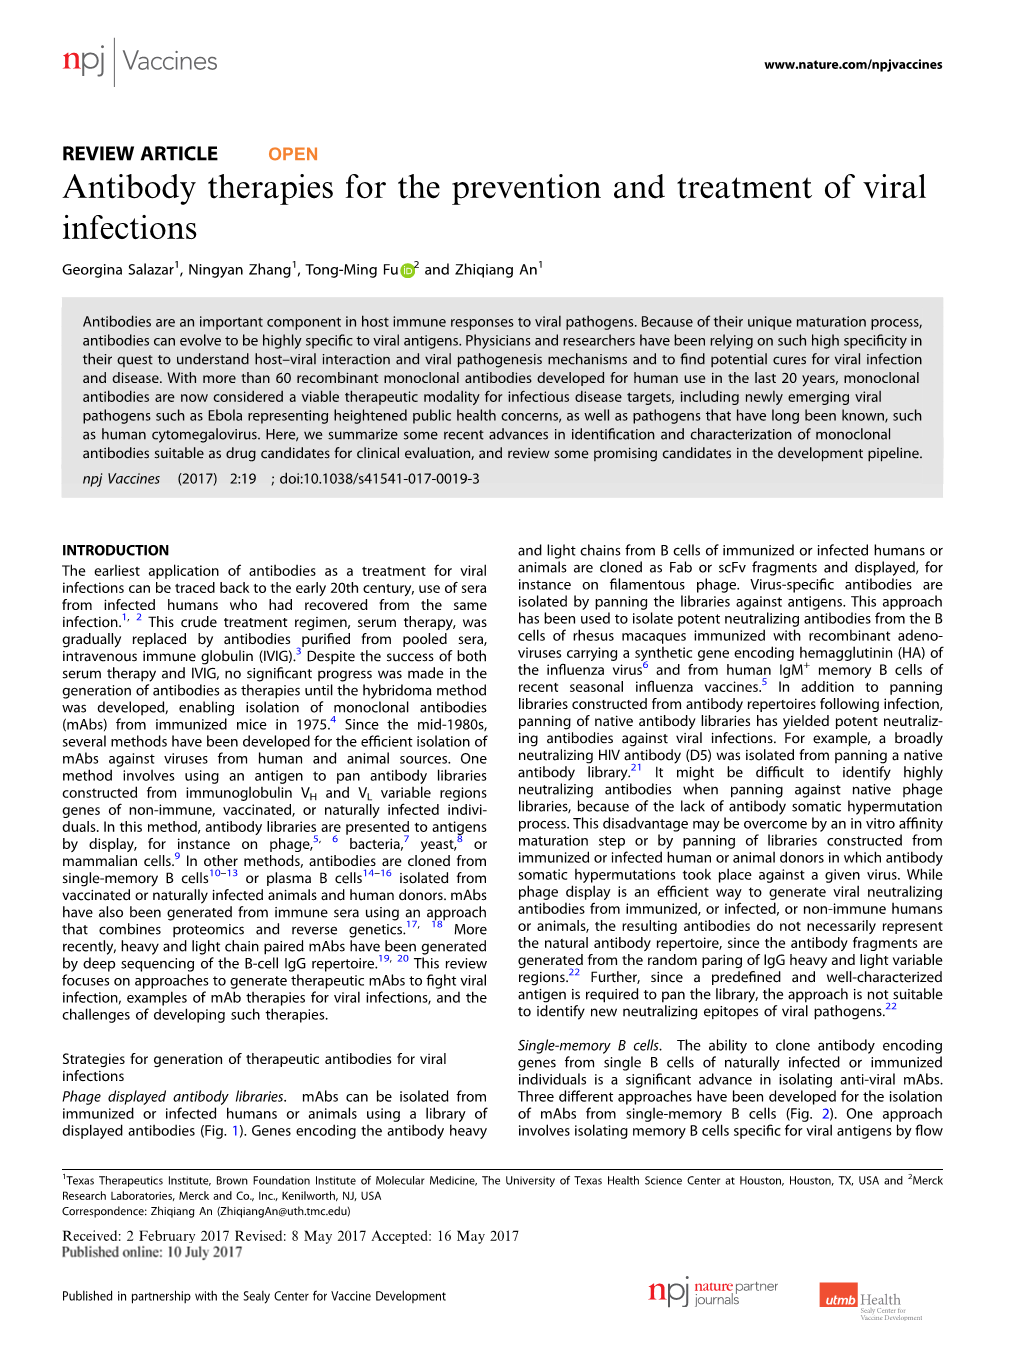 Antibody Therapies for the Prevention and Treatment of Viral Infections